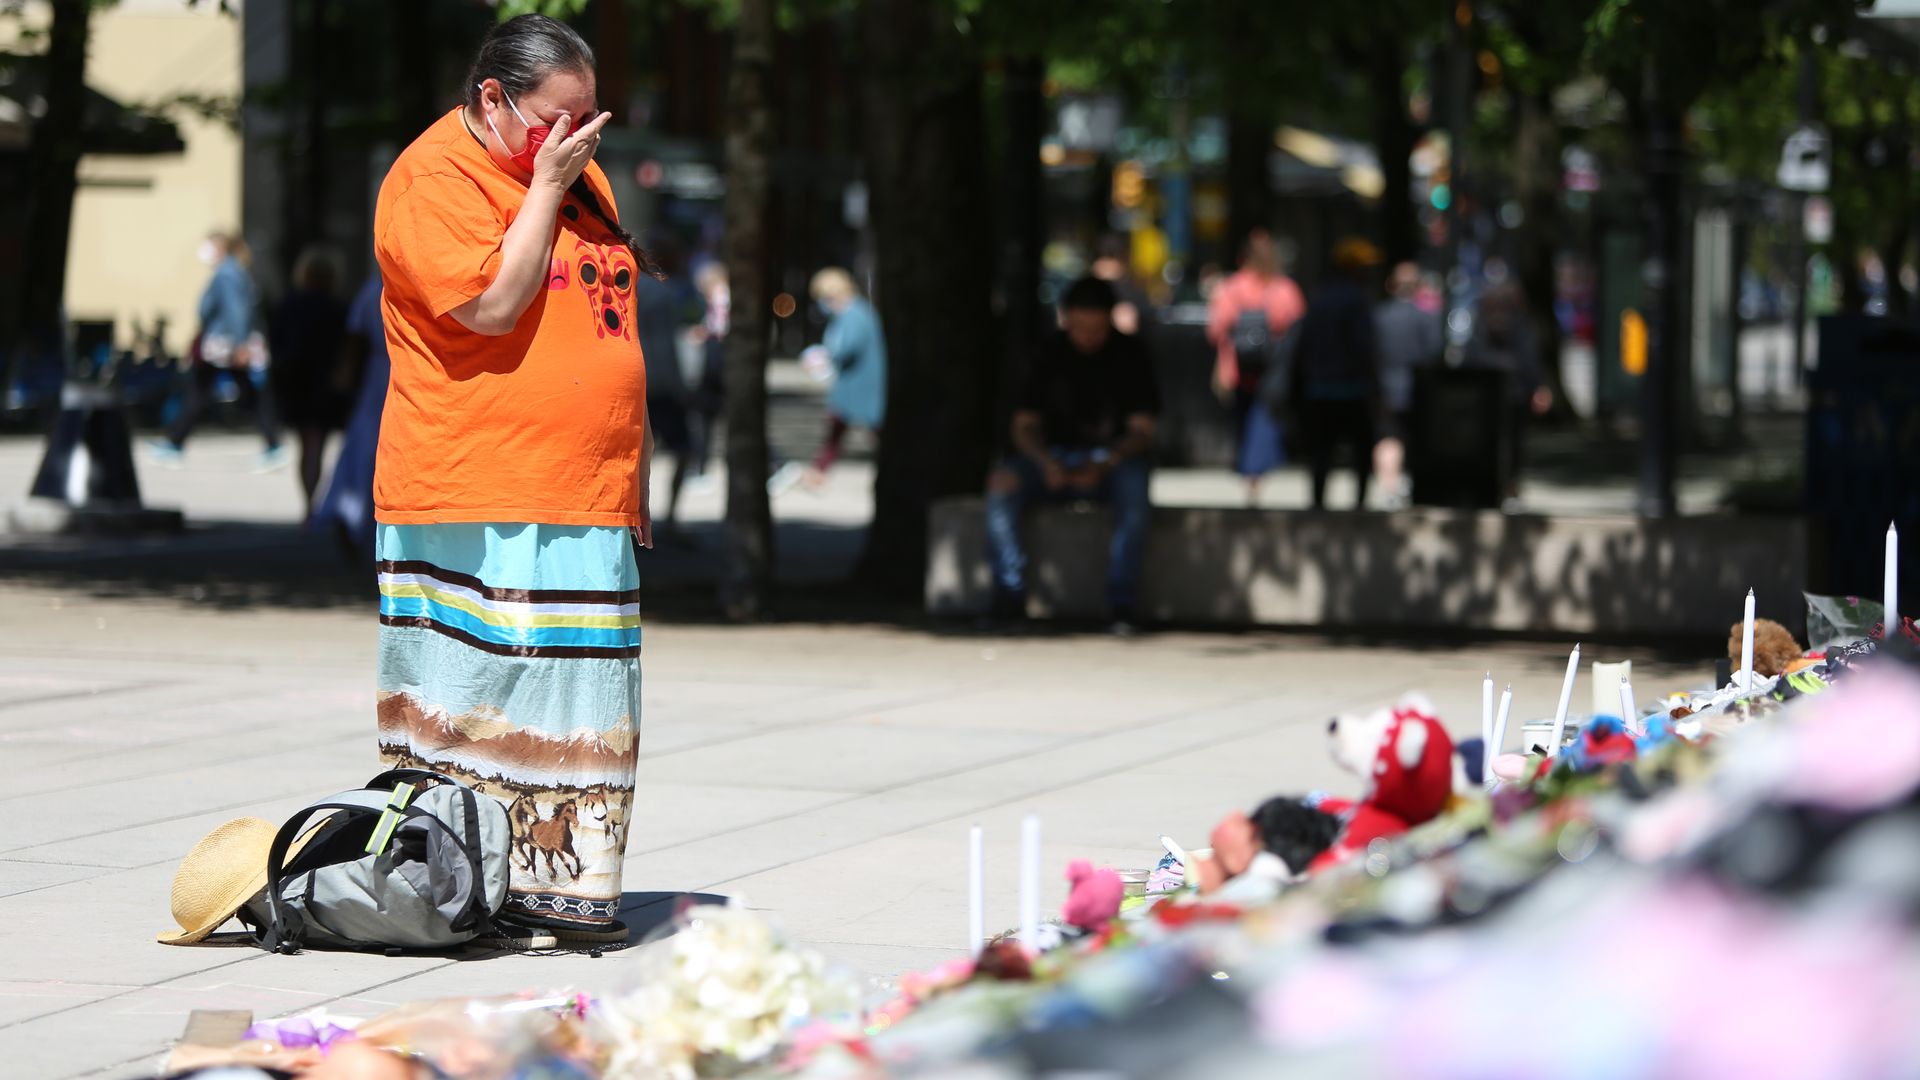 A woman mourns over 215 pairs of kids shoes outside Vancouver Art Gallery during a memorial on May 29, 2021 in Vancouver, British Columbia, Canada